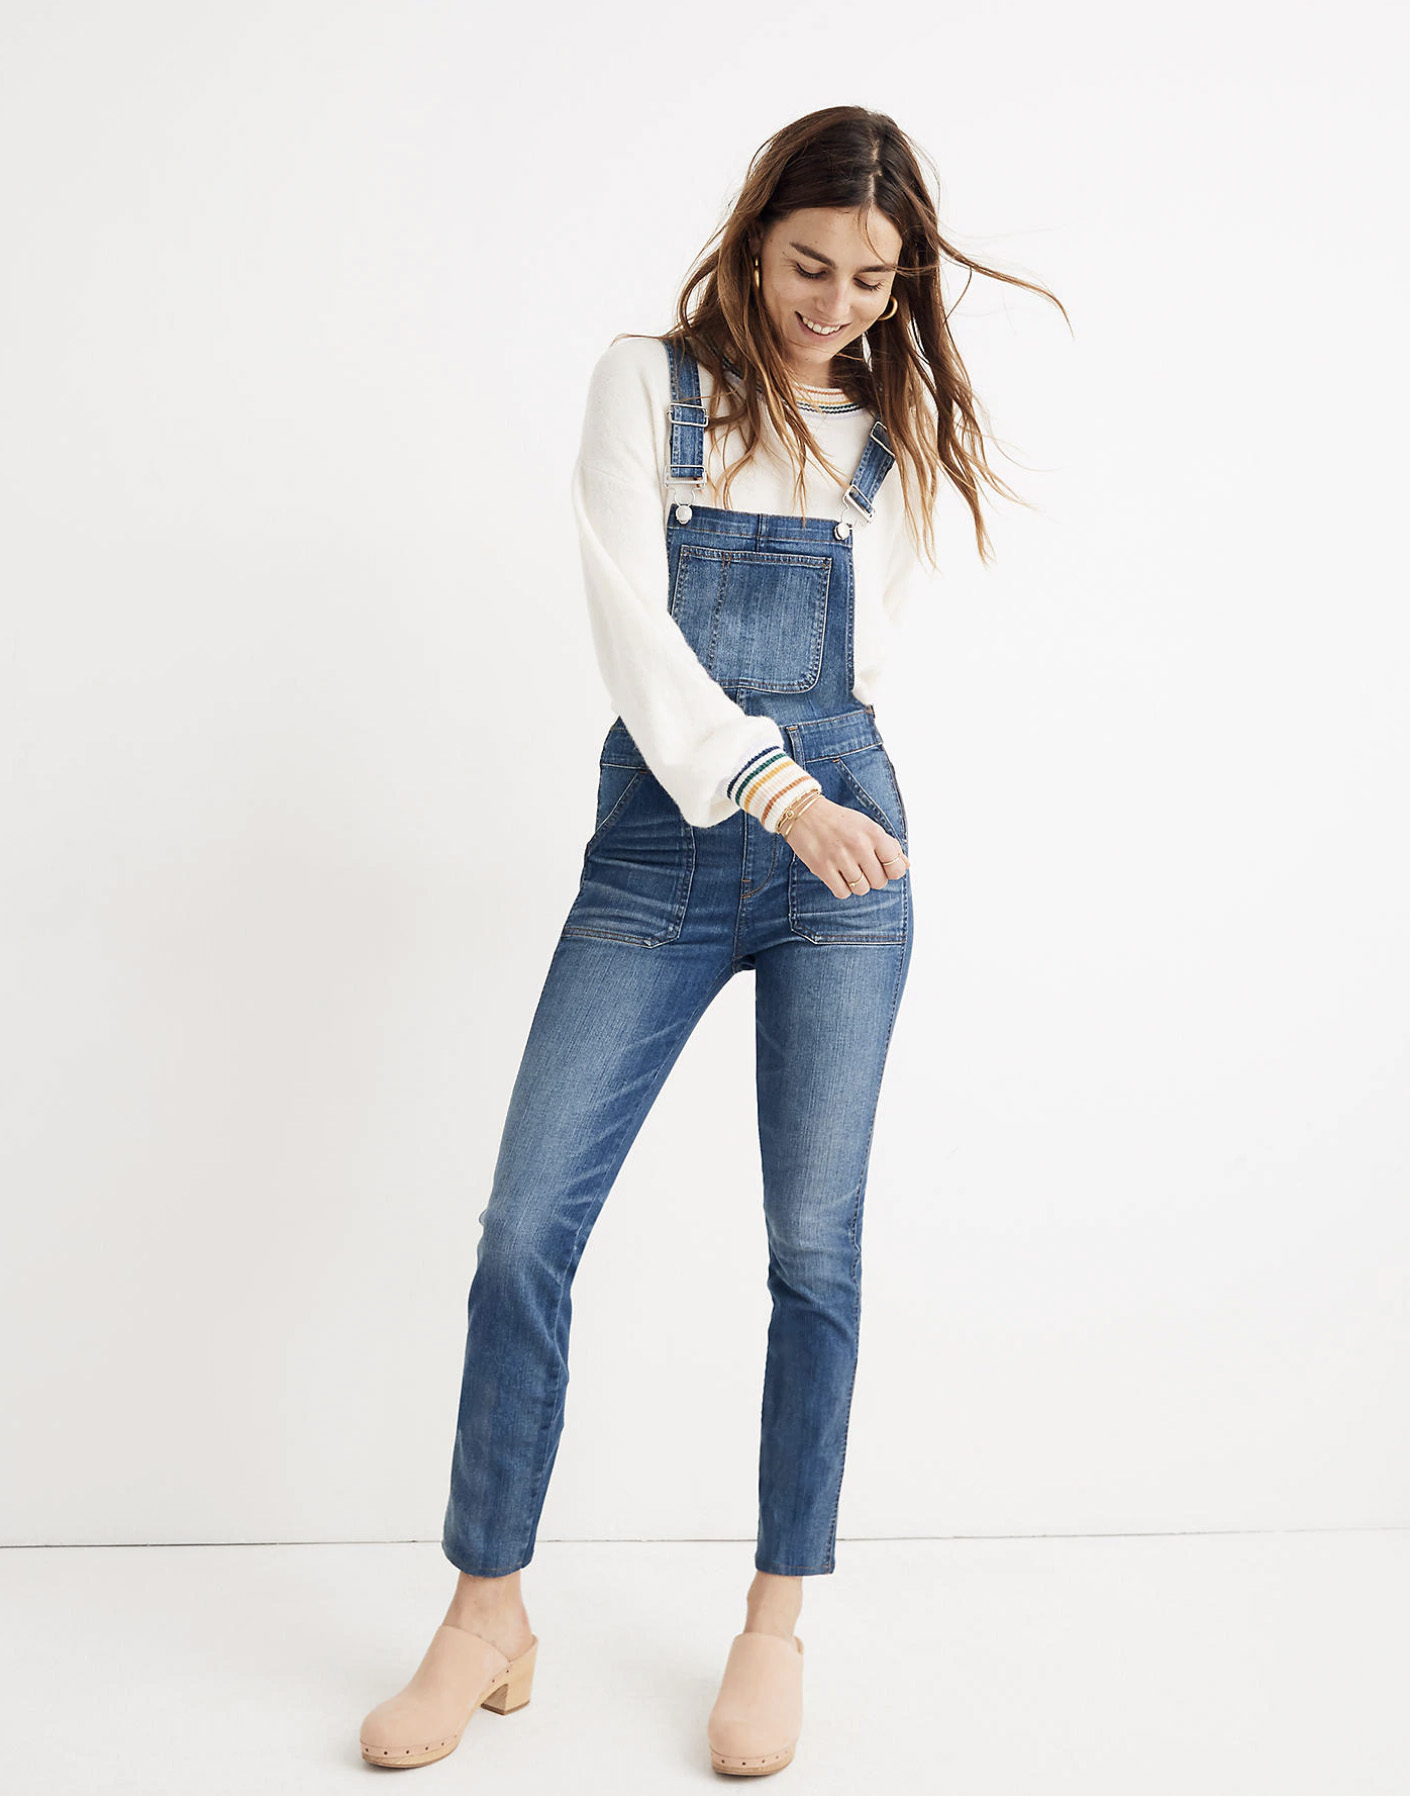 Madewell Skinny Overalls in Jansing Wash